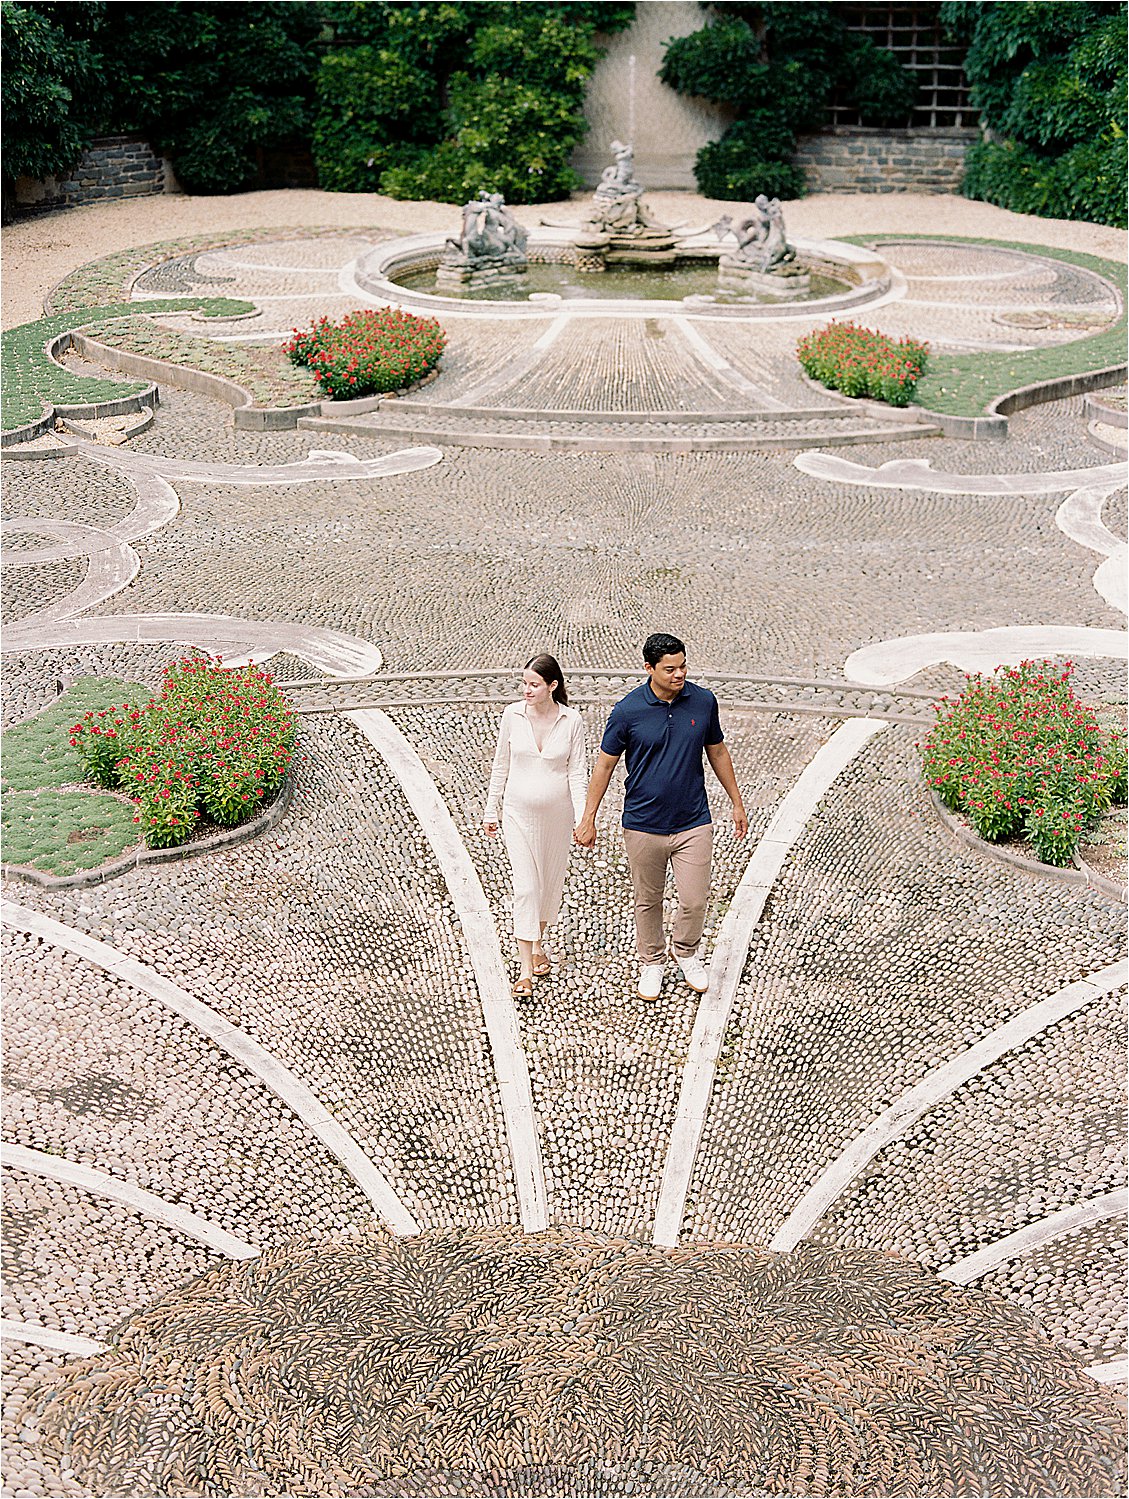 Intricate garden landscaping at summer maternity session in Washington DC